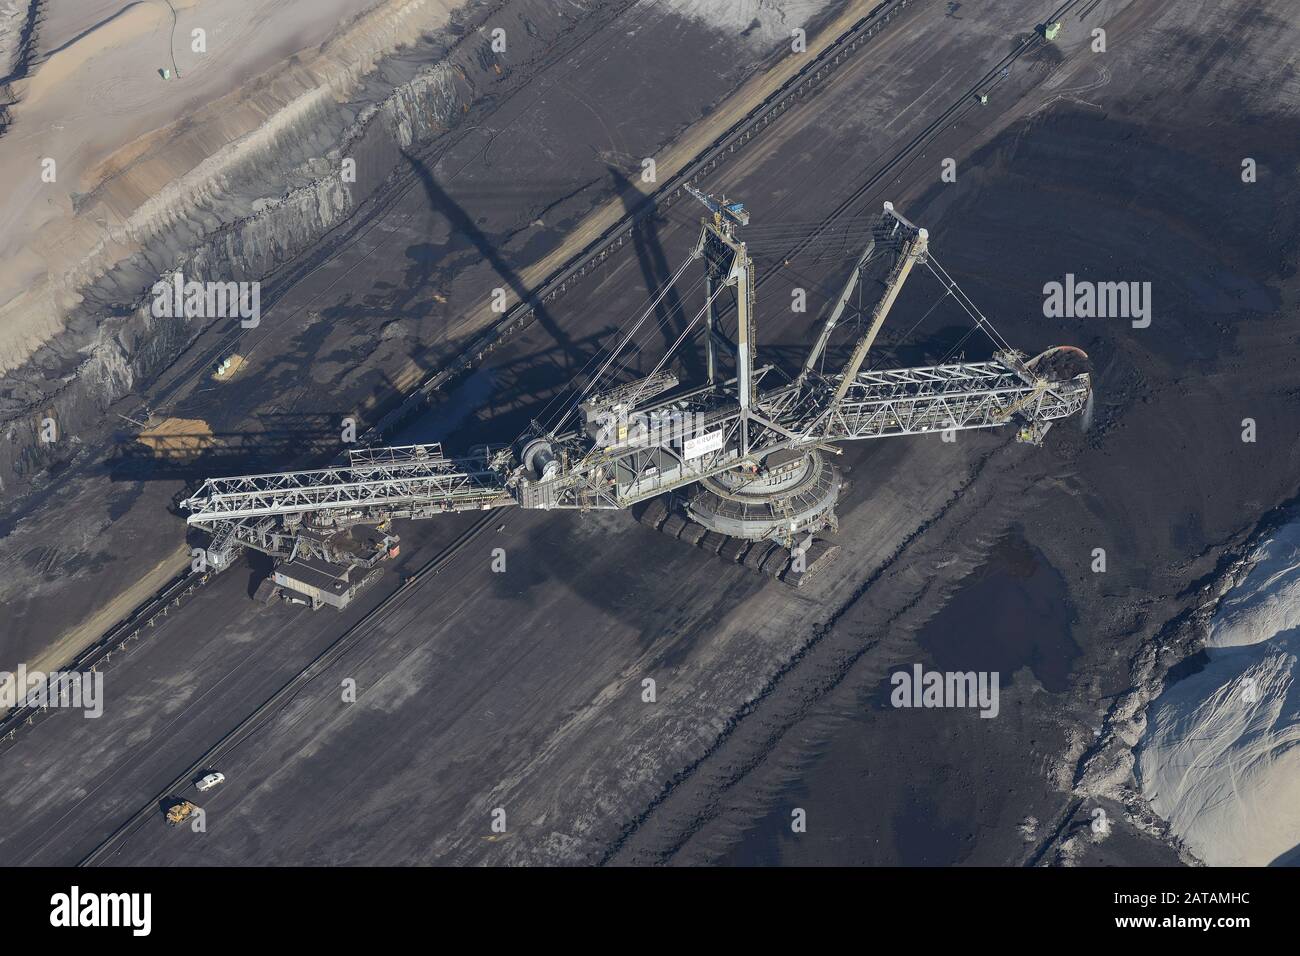 AERIAL VIEW. Bagger 284 is an excavator at the coal mine of Garzweiler. North Rhine Westphalia, Germany. Stock Photo